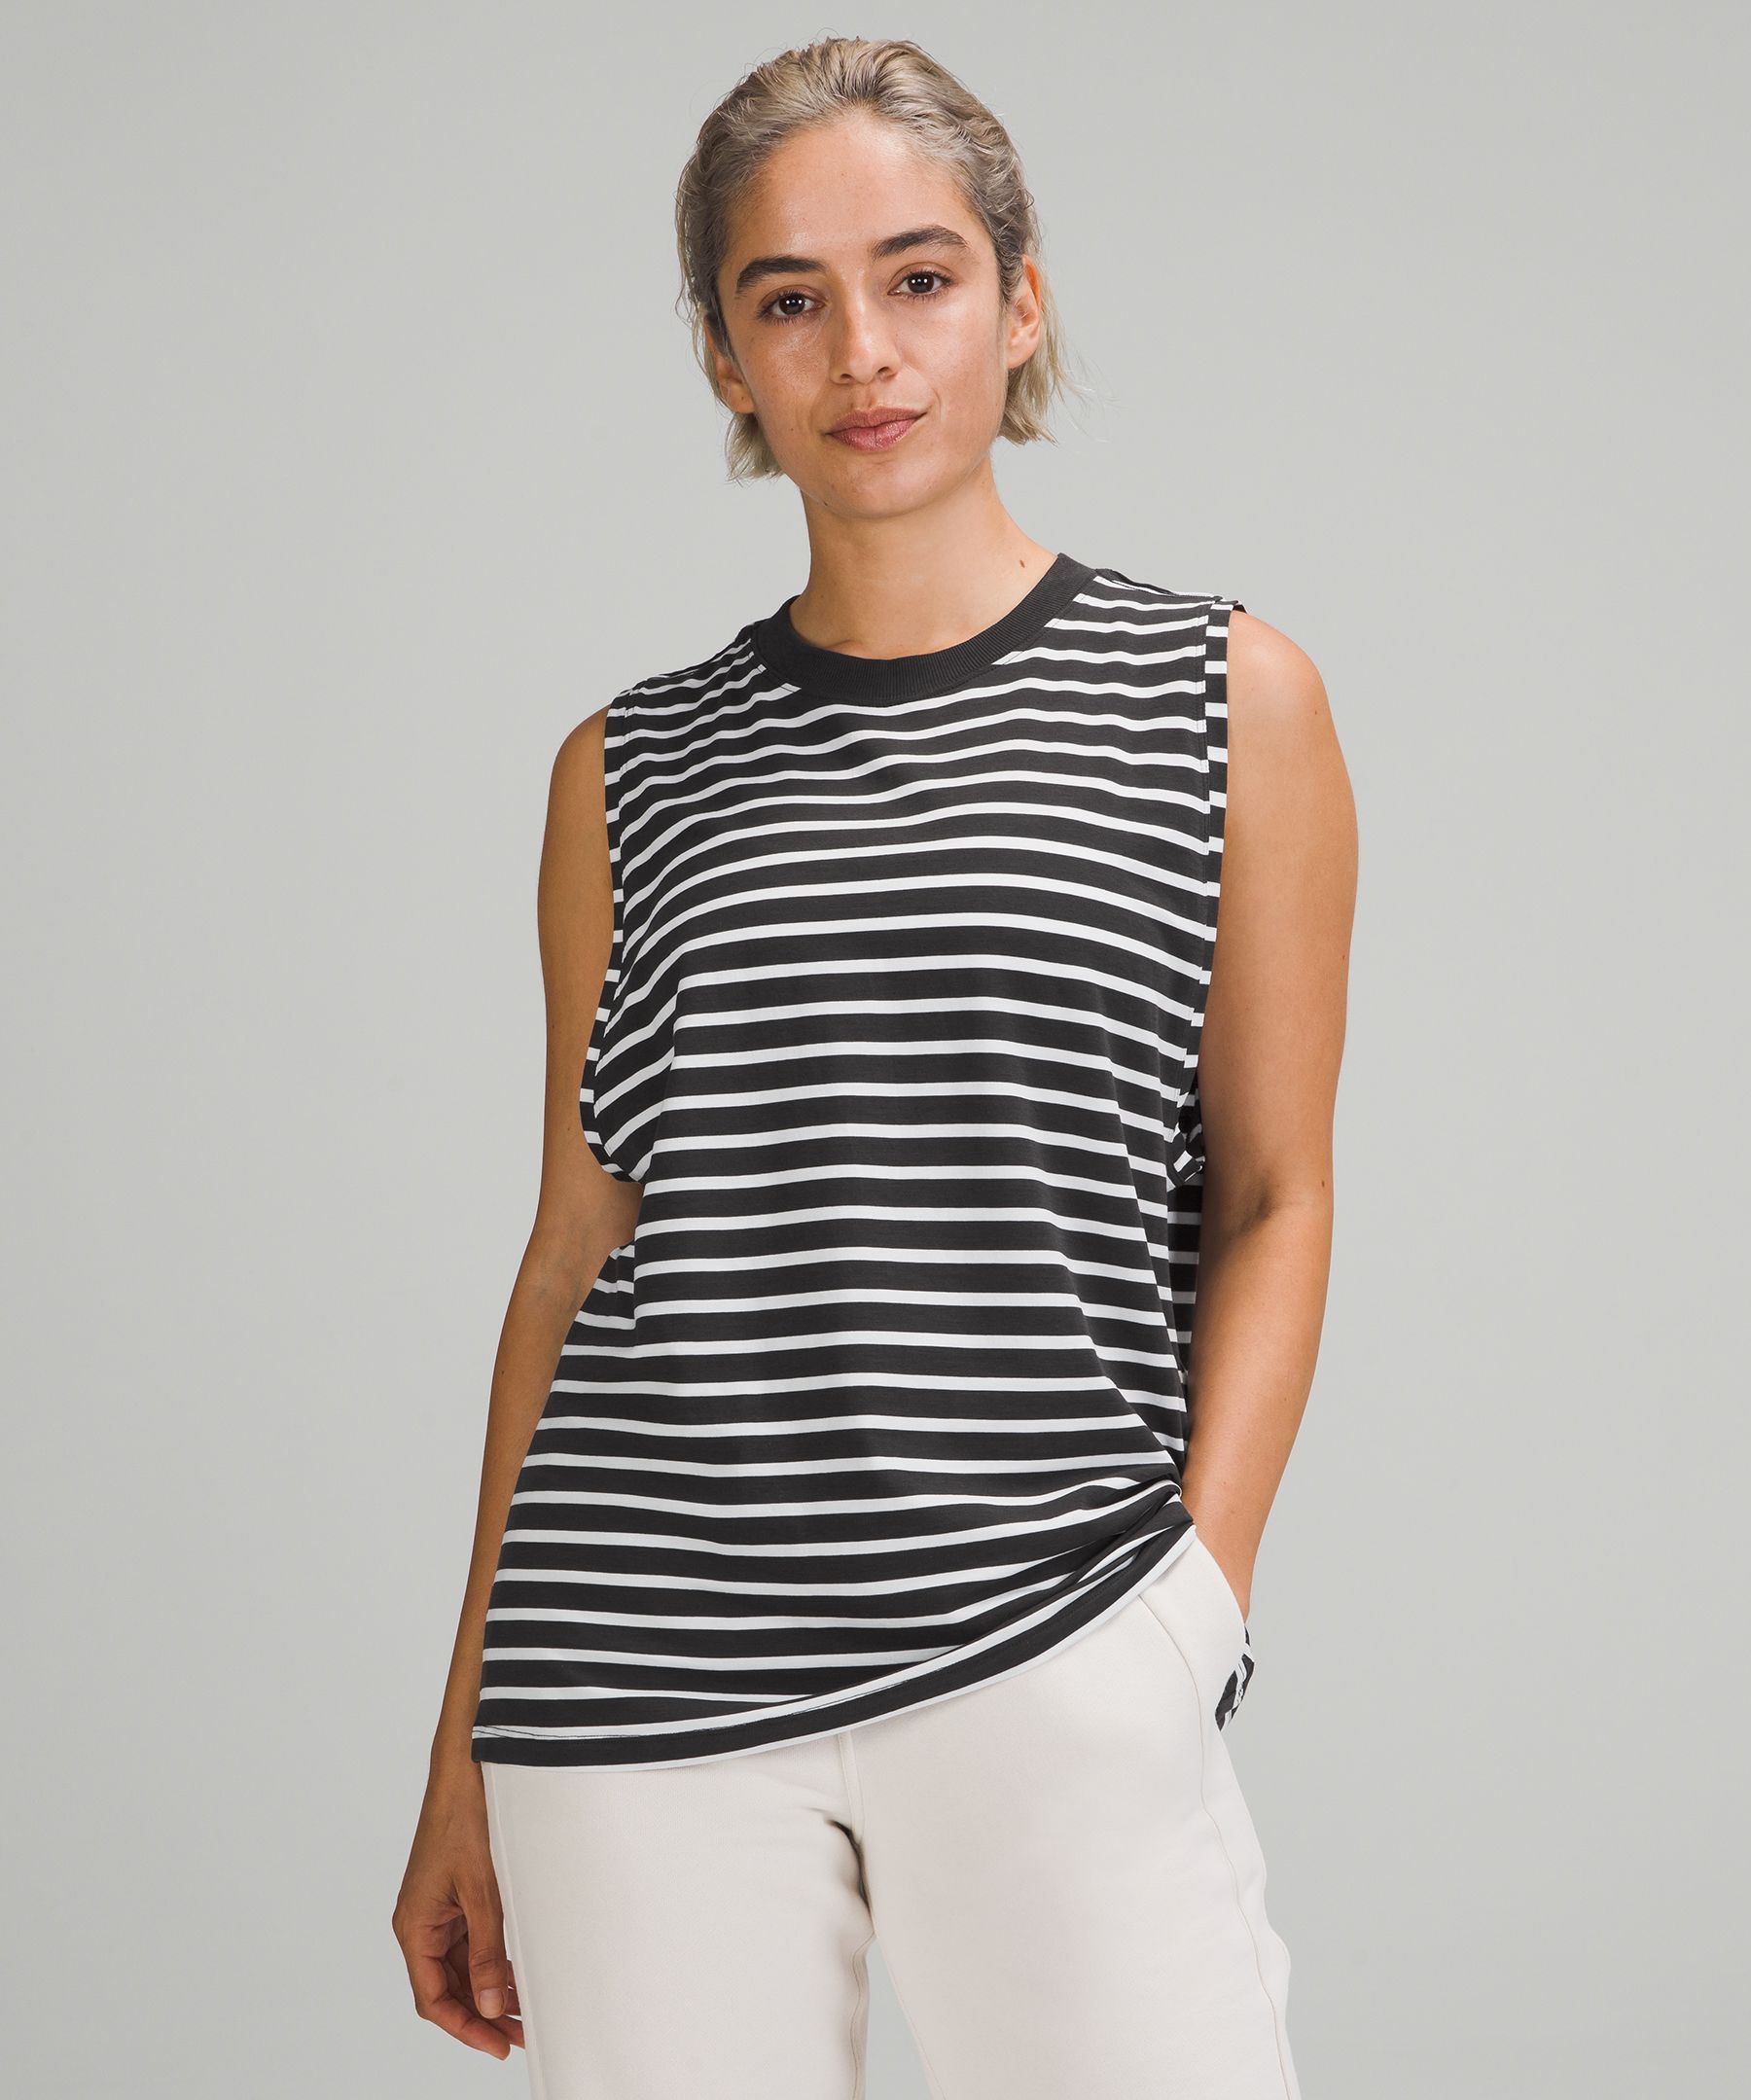 Lululemon All Yours Tank Top In Yachtie Stripe Graphite Grey White